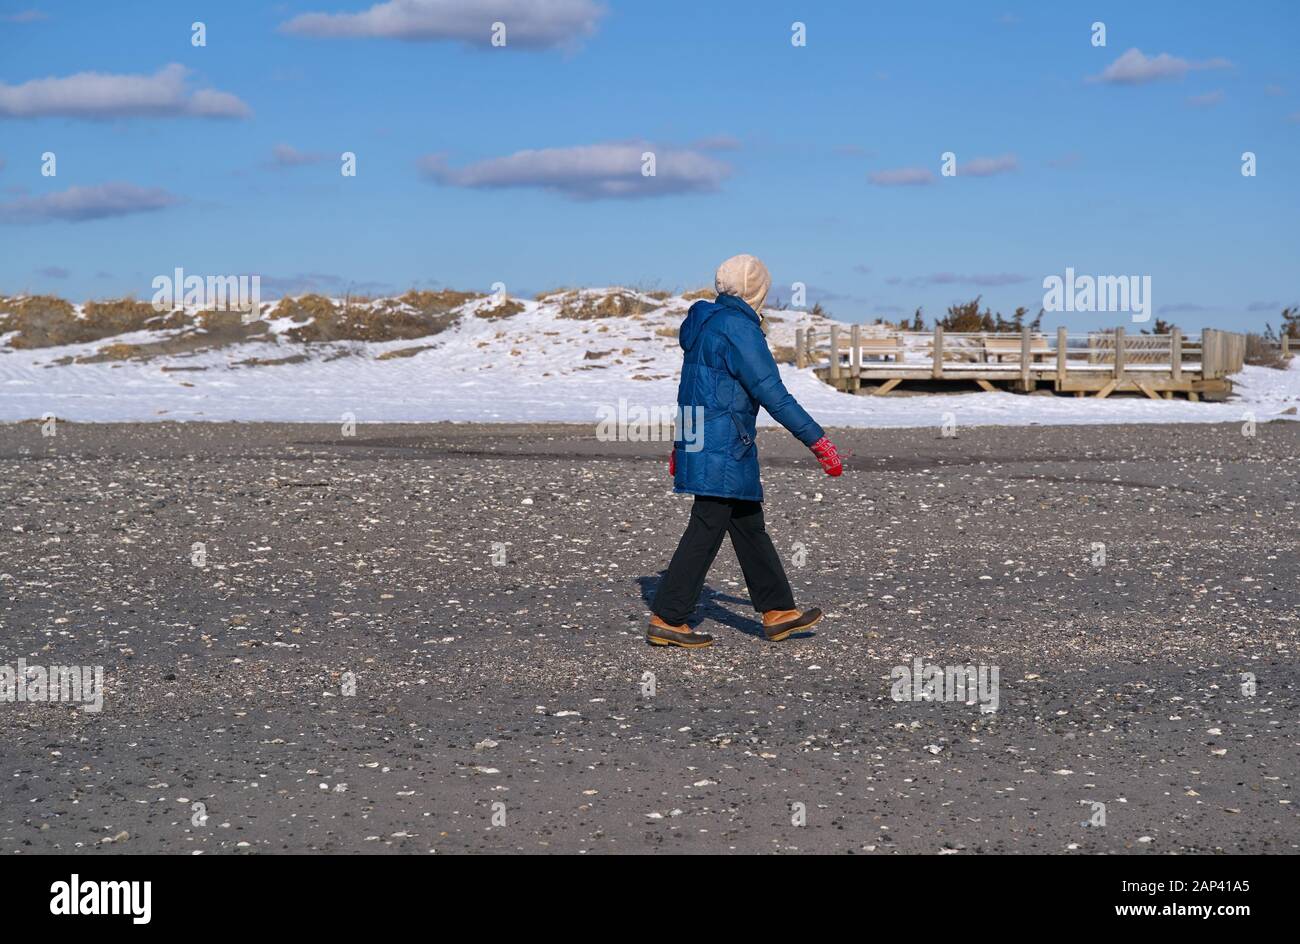 Elderly lady with cold weather clothing walking at the beach during a New England winter season. Stock Photo